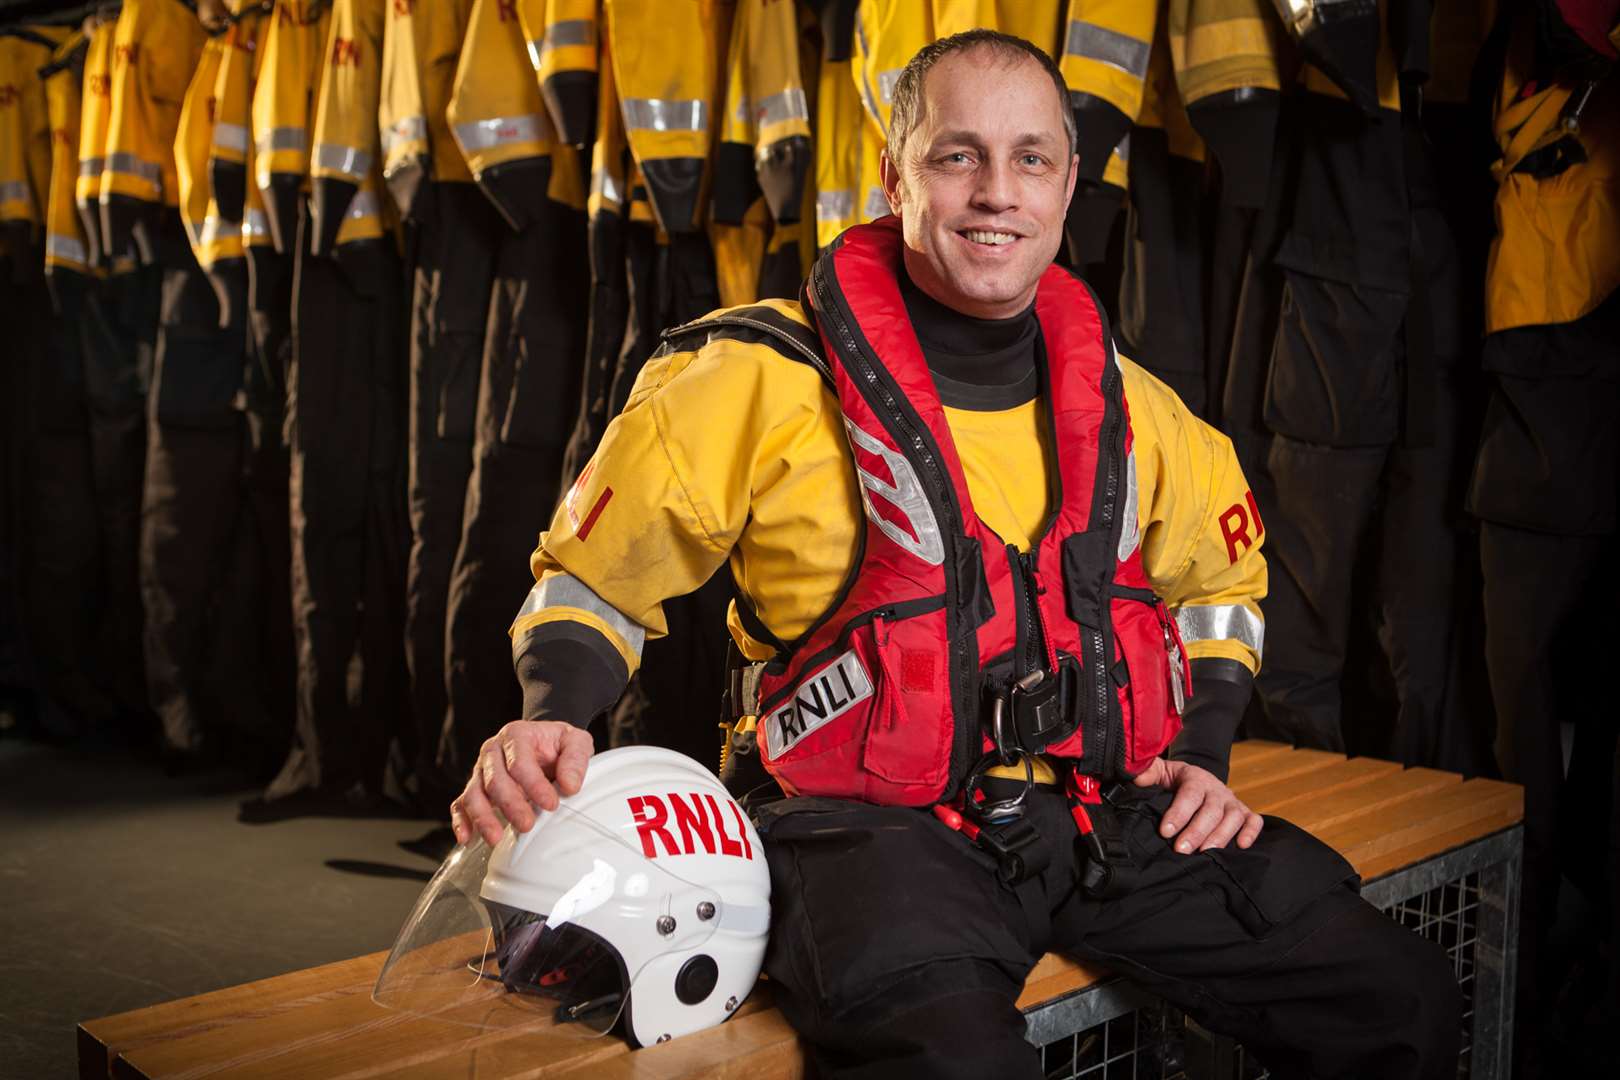 Mick Nield from Rochester has worked for the RNLI for 14 years